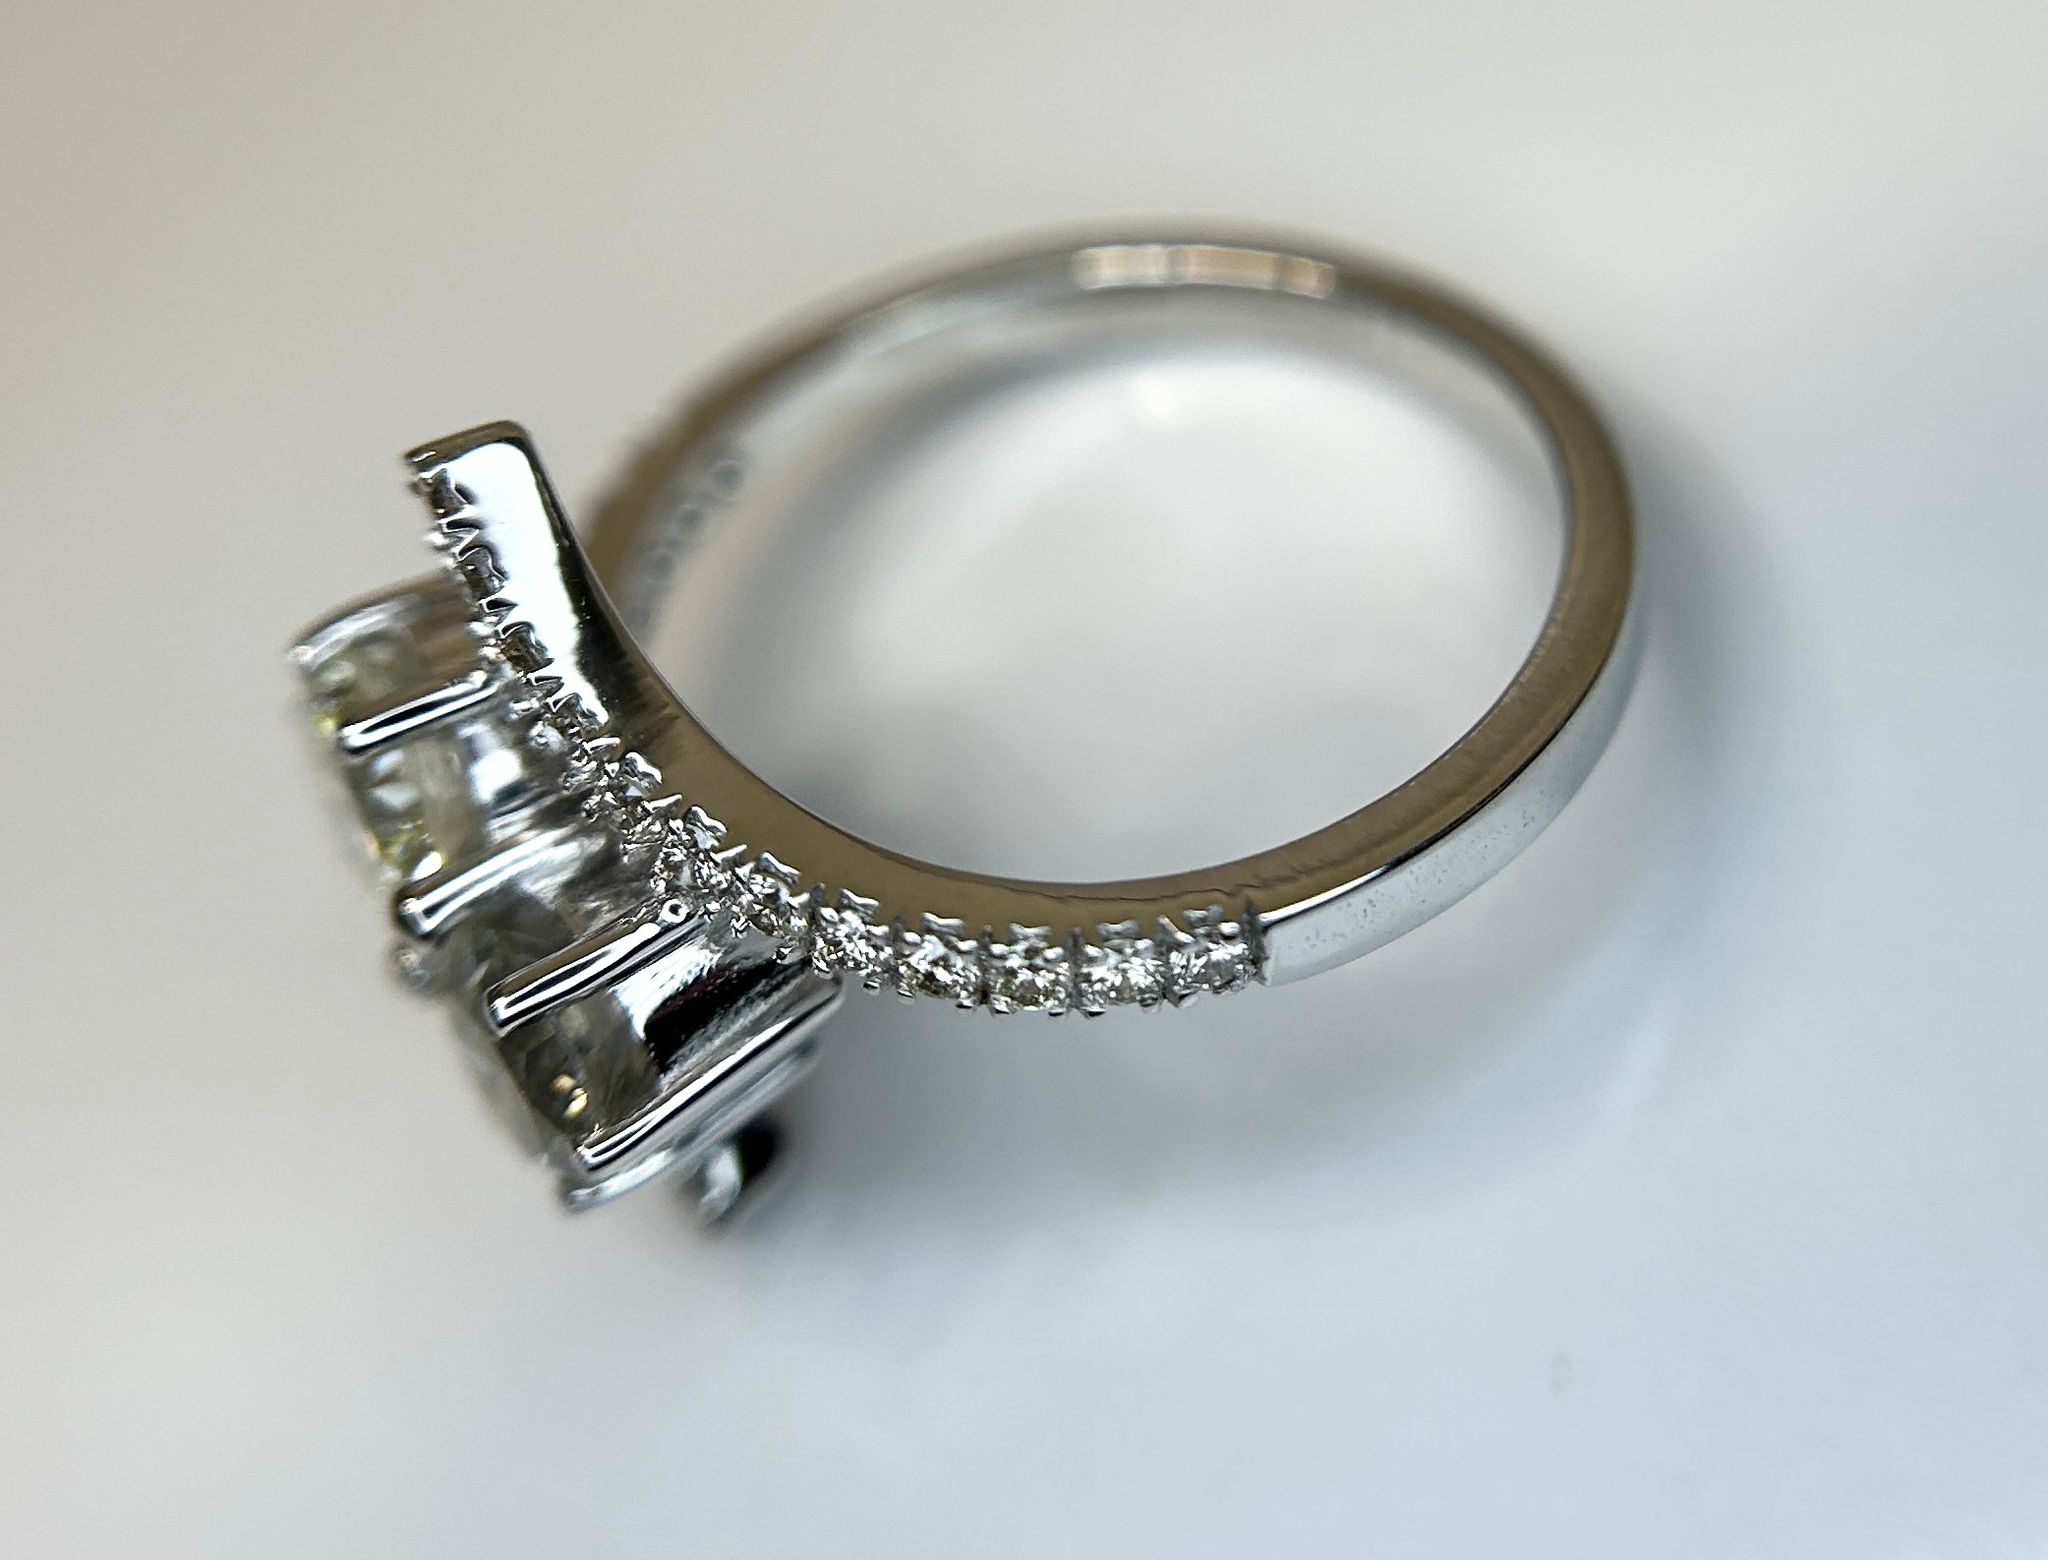 Beautiful Natural 1.15 Carat Diamond Ring With 18k White Gold - Image 5 of 7